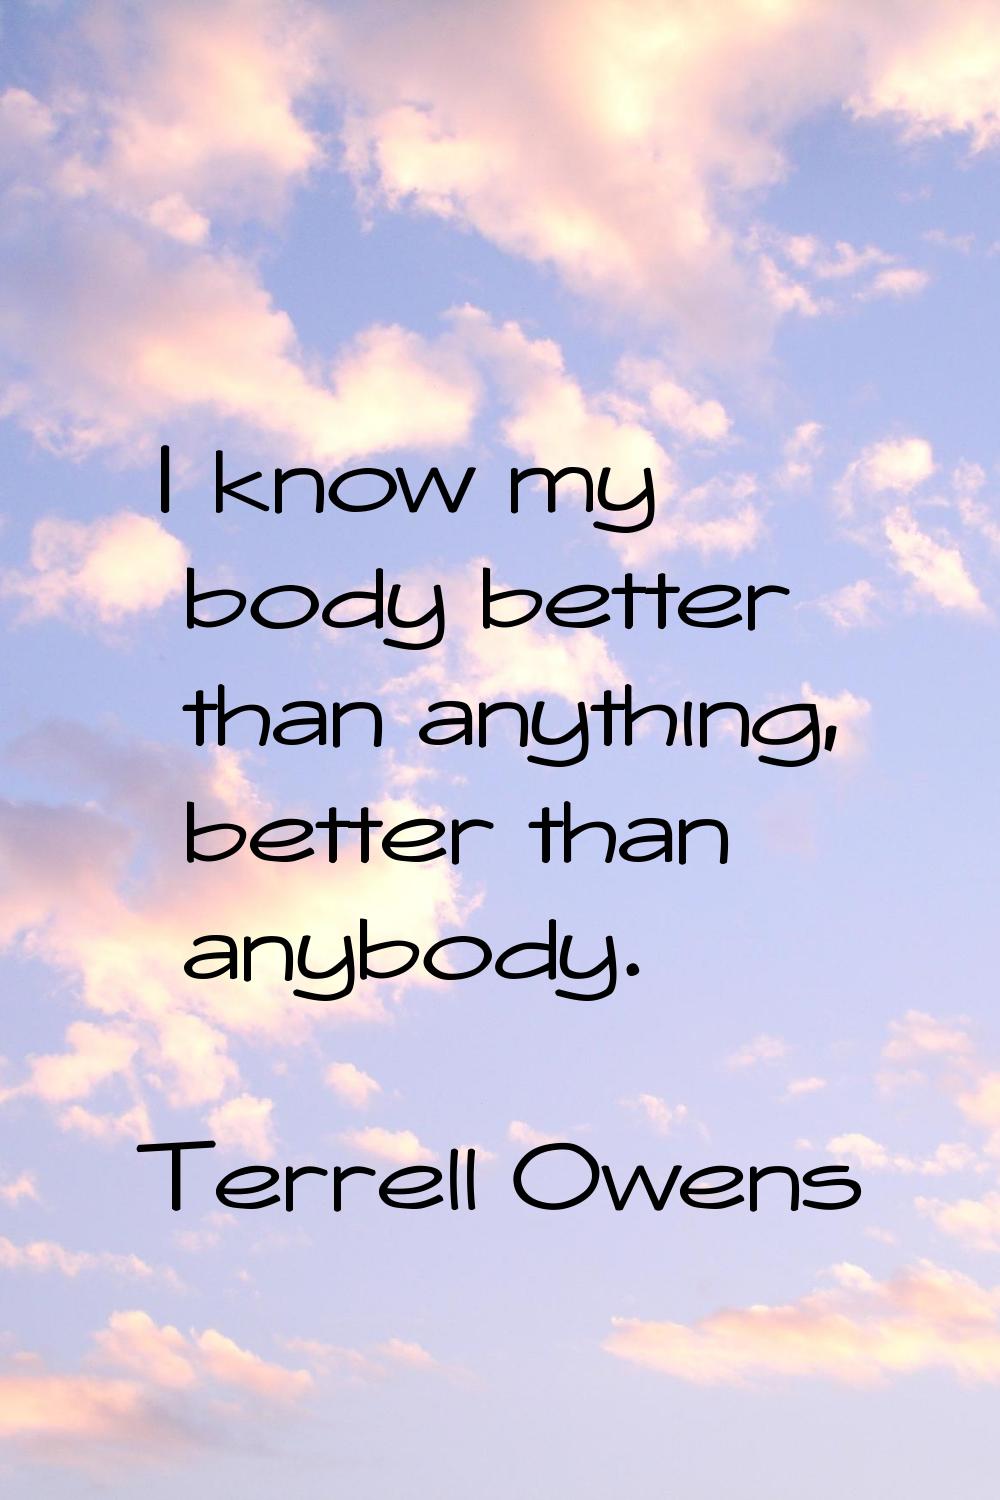 I know my body better than anything, better than anybody.